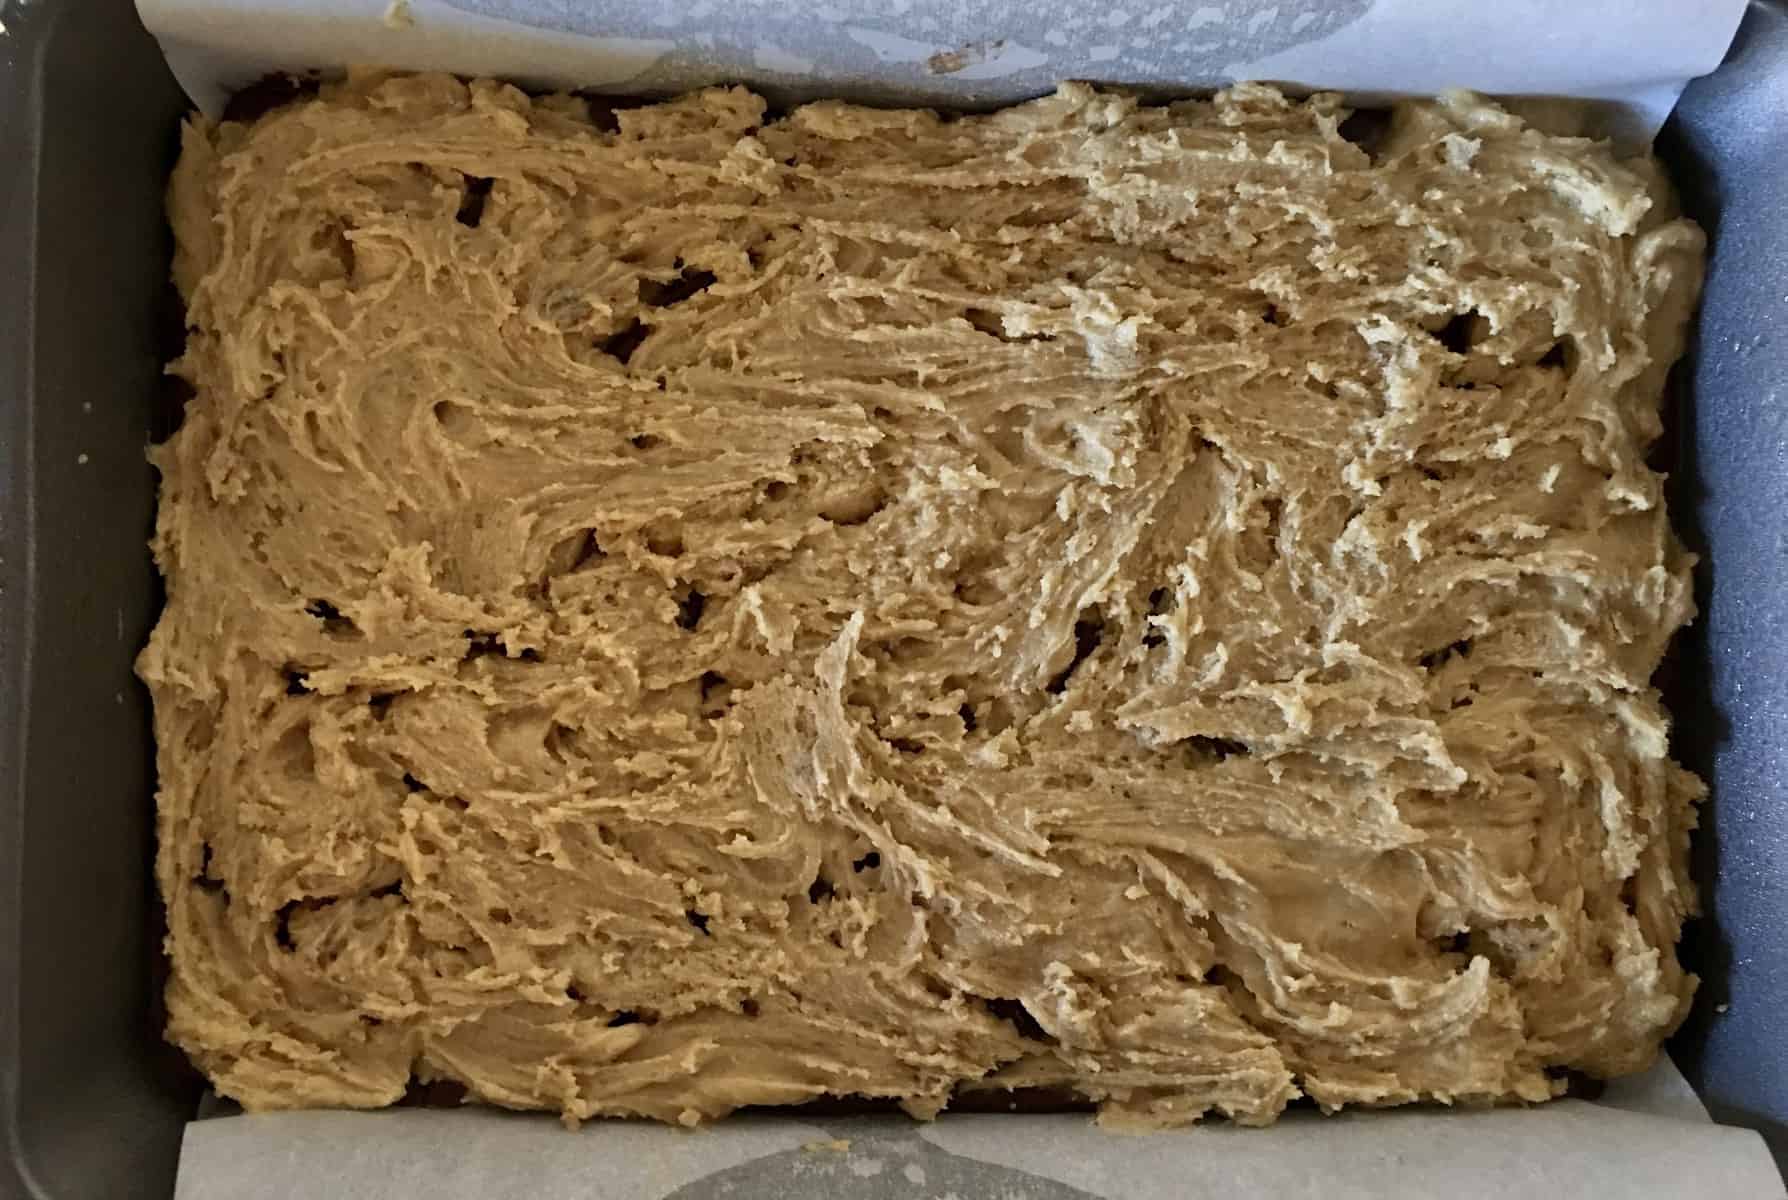 Blondie layer spread over the brownie layer in pan. 